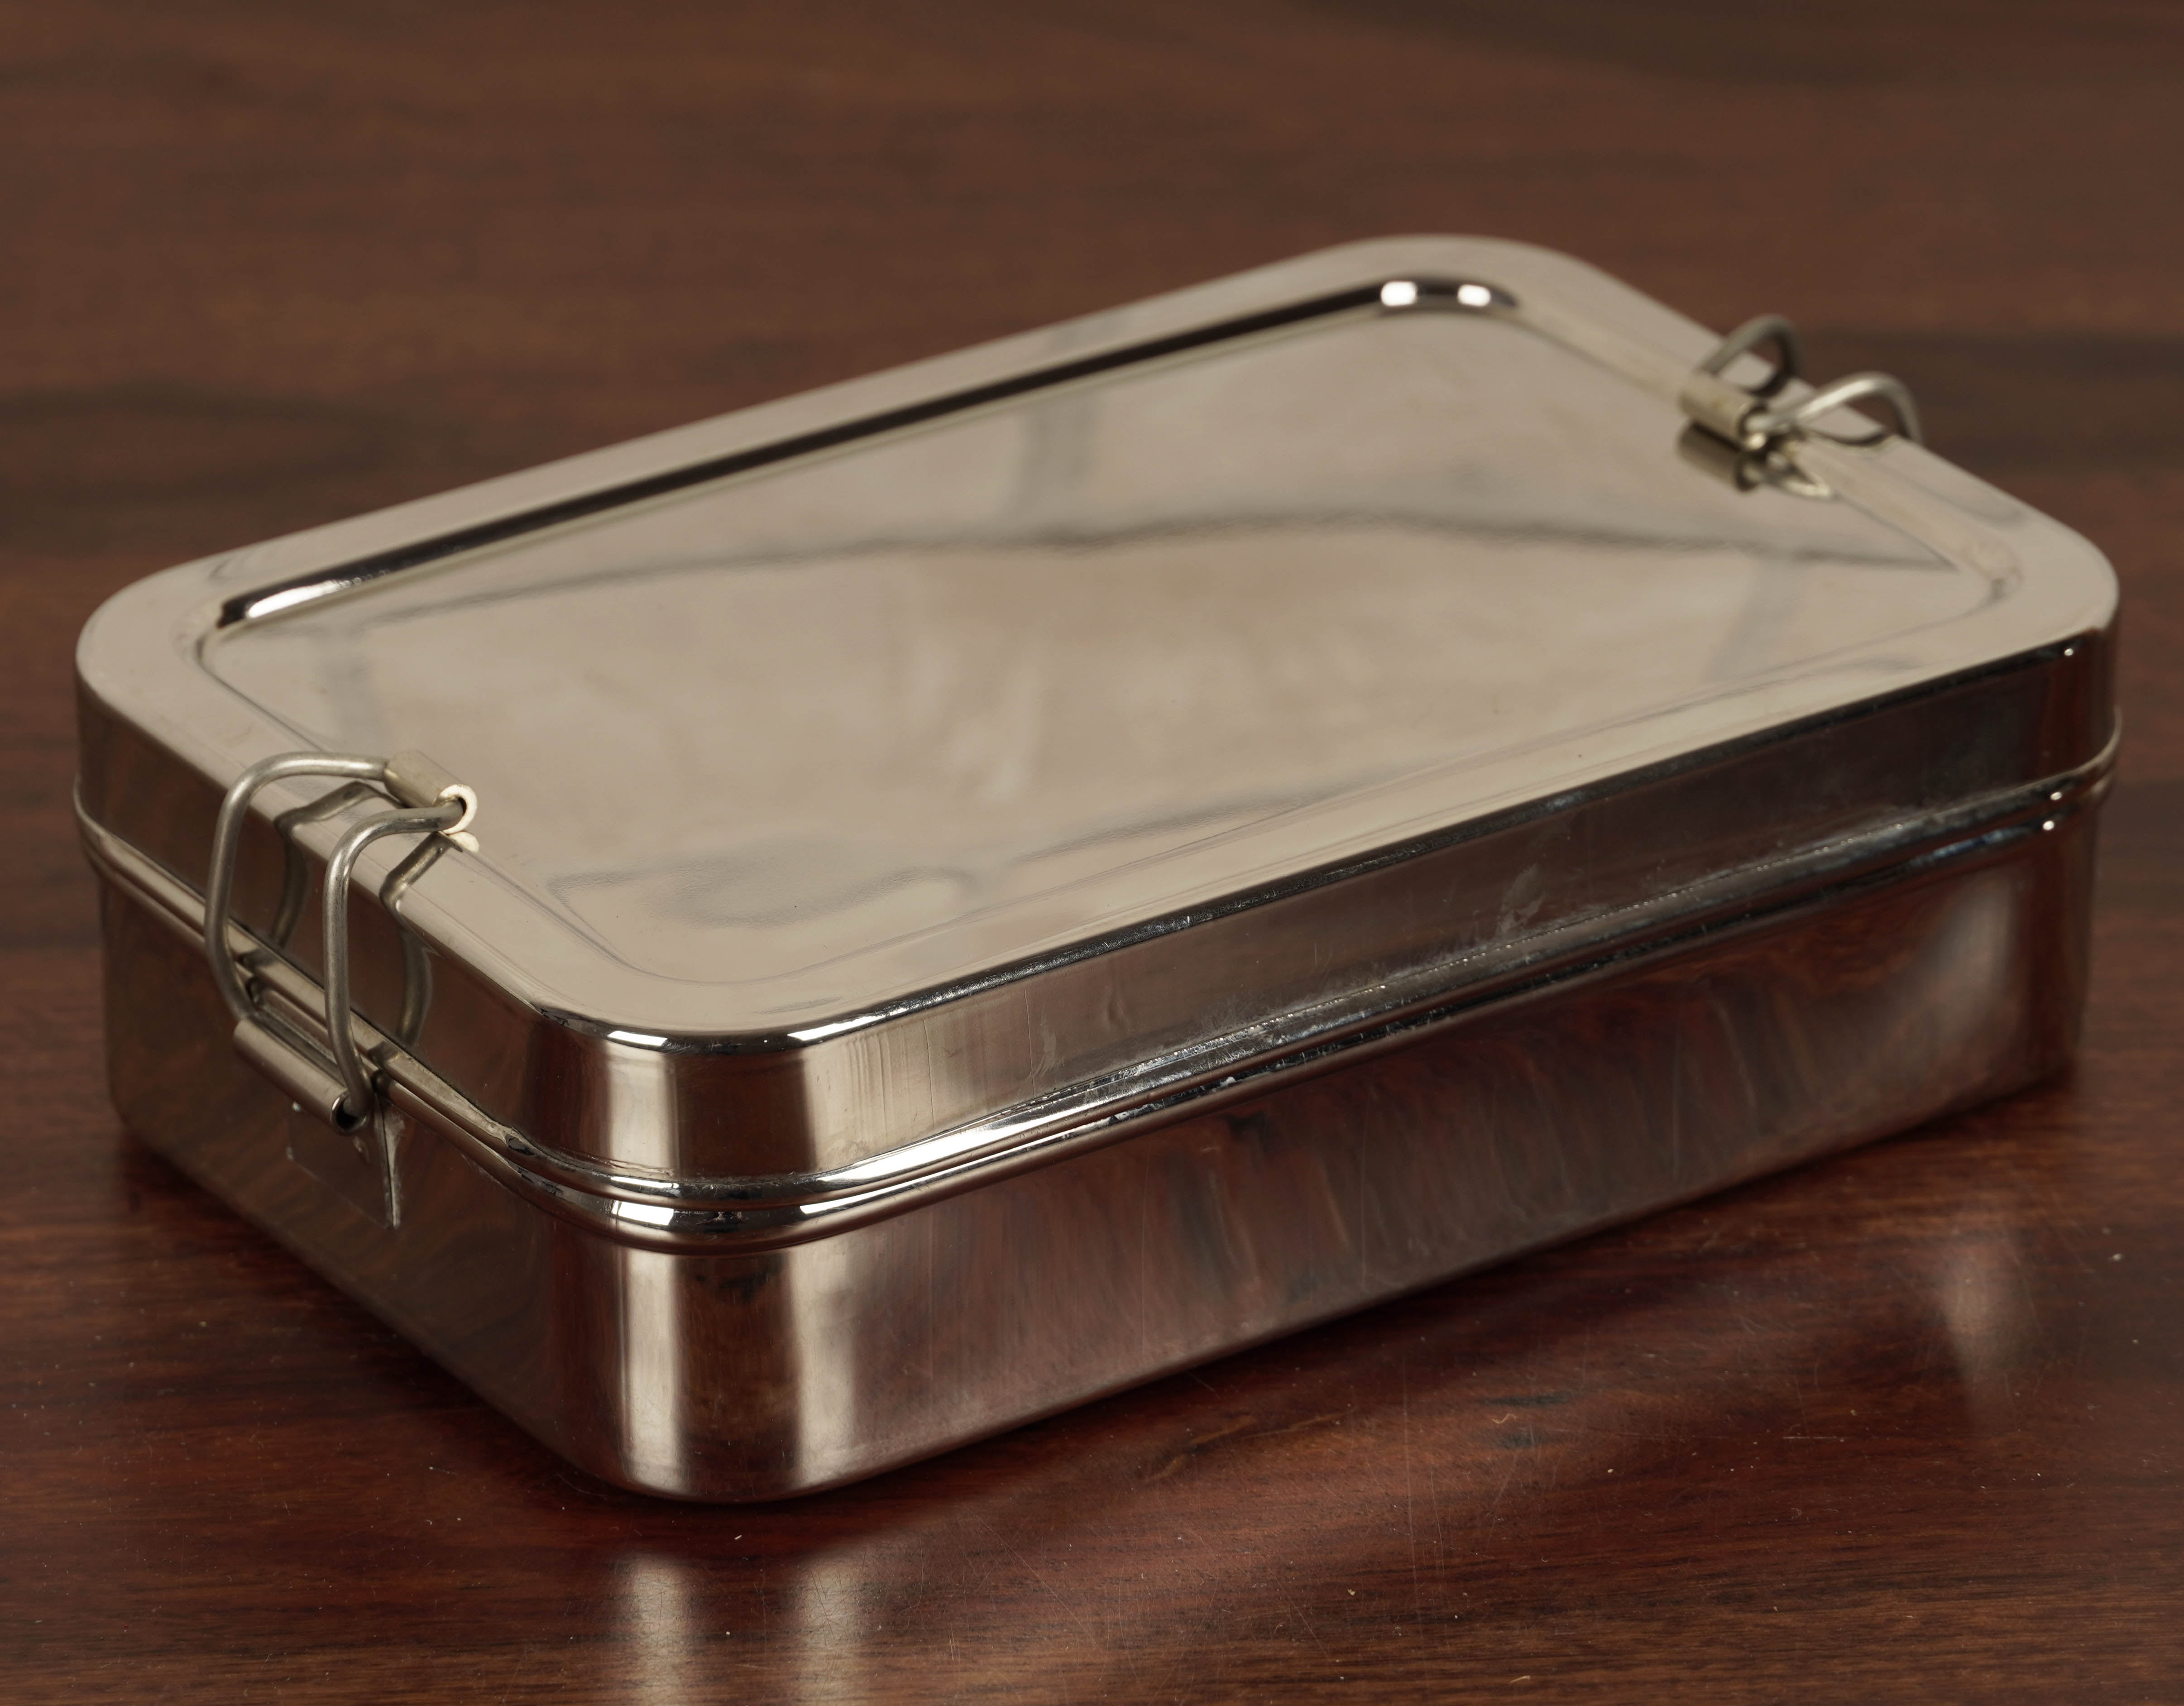 Stainless Steel Lunch Box for School, Office Tiffin – Rectangular